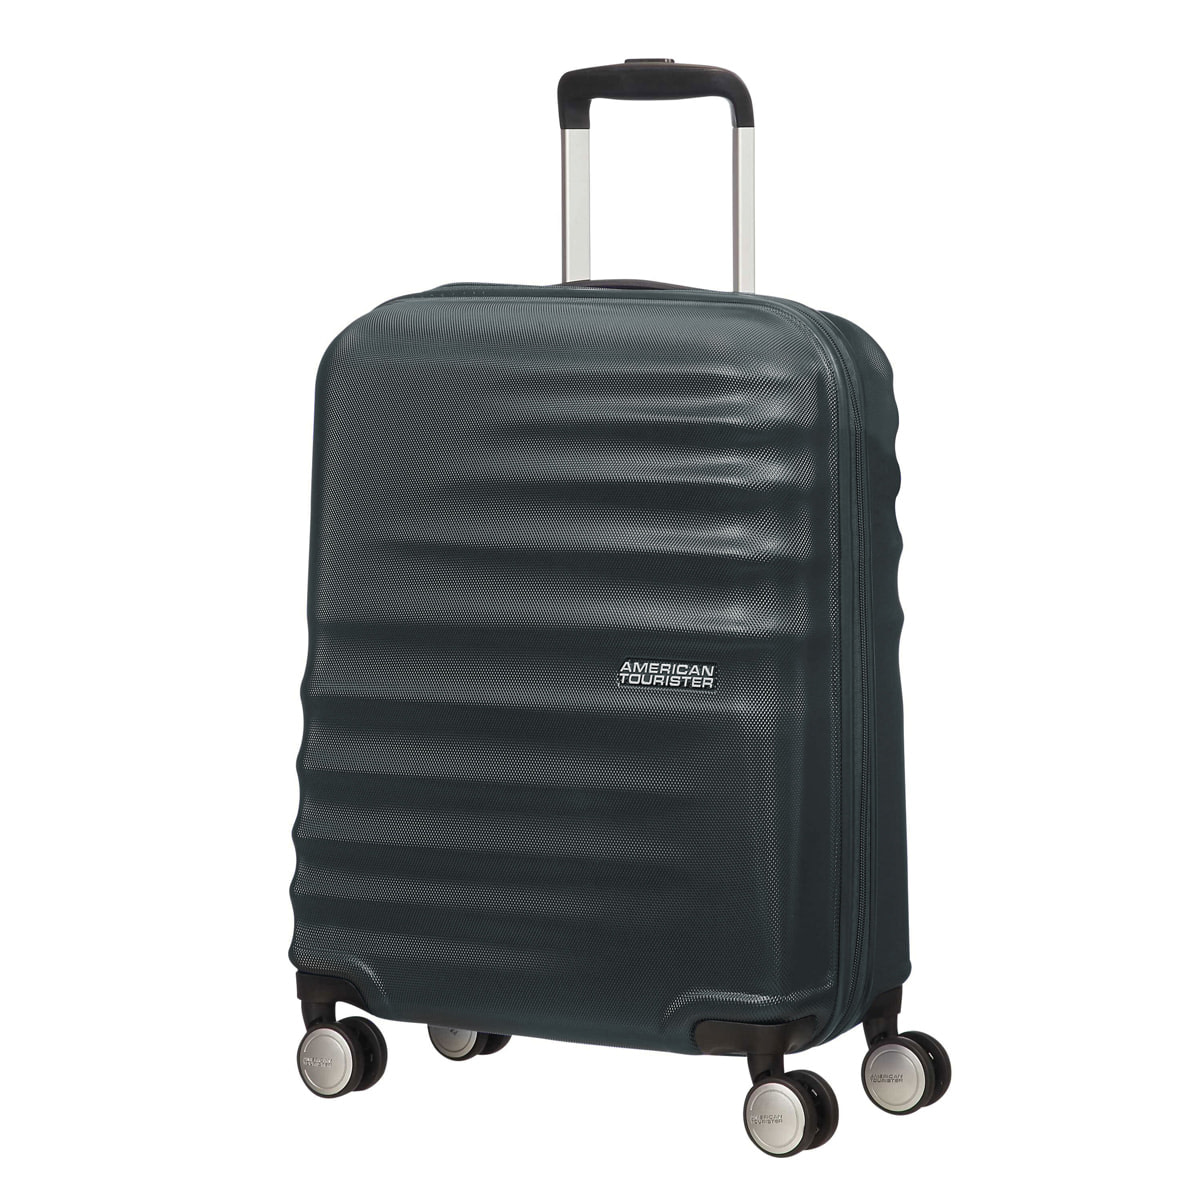 Best carry on luggage affordable